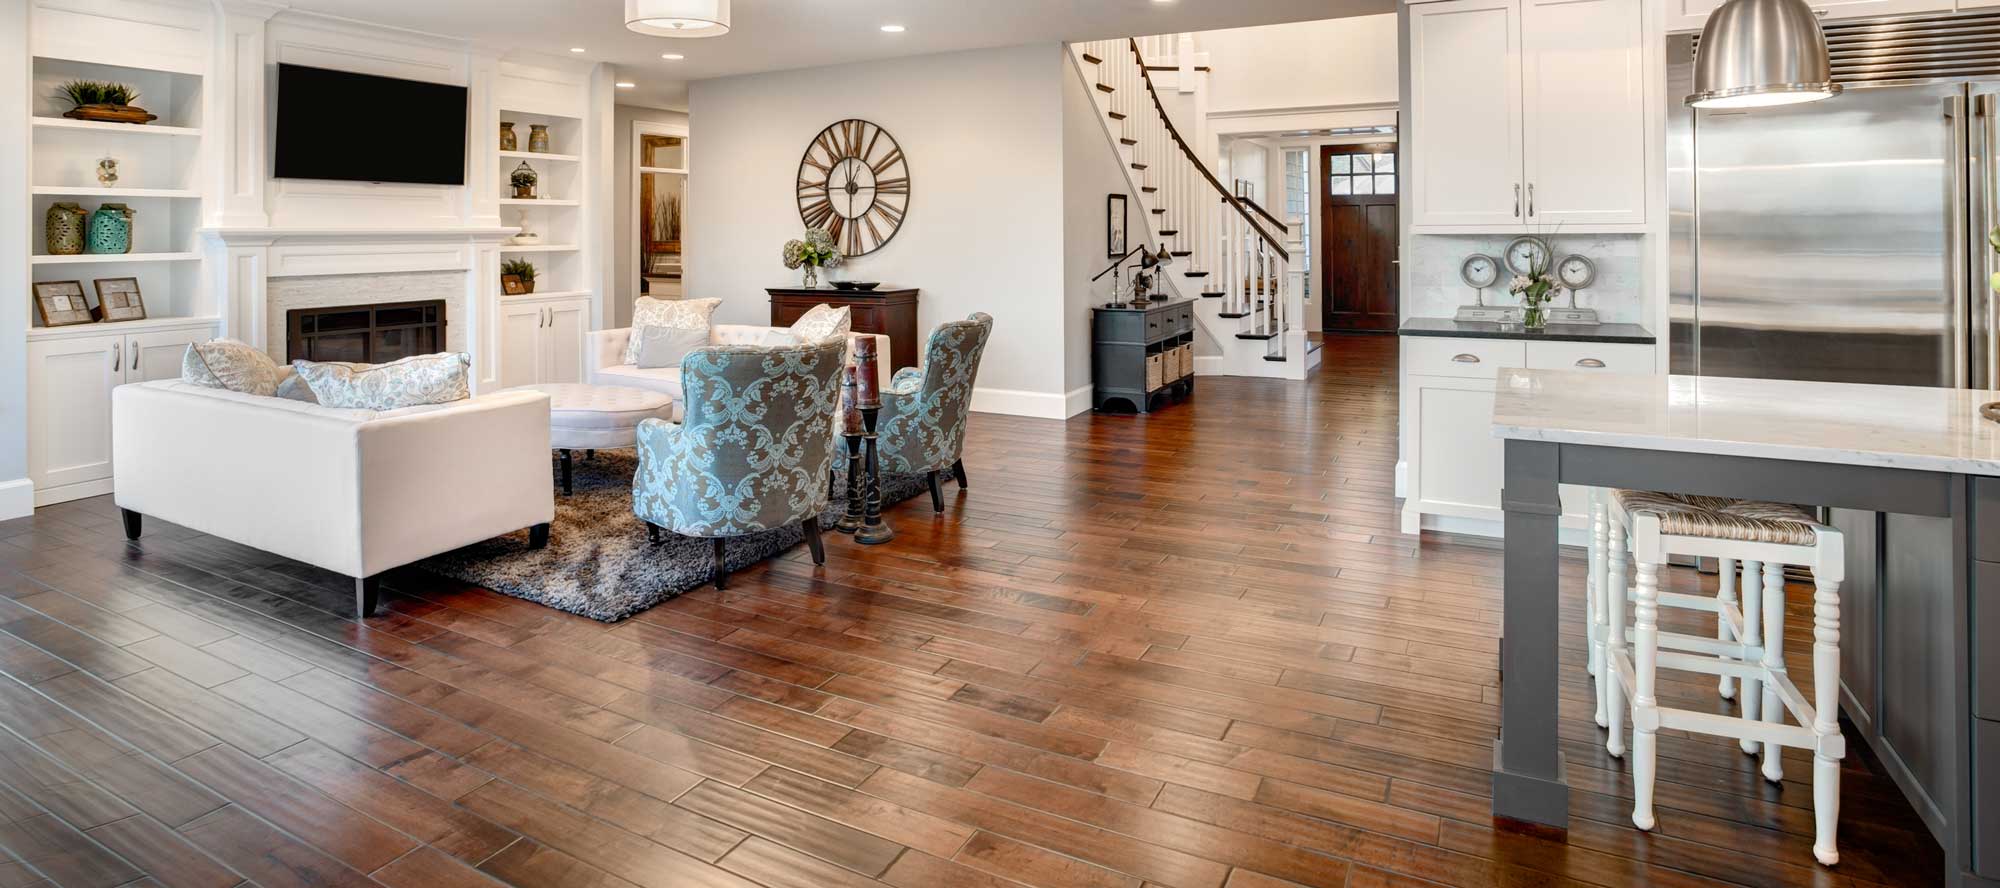 Hardwood floor flowing through kitchen into a family room